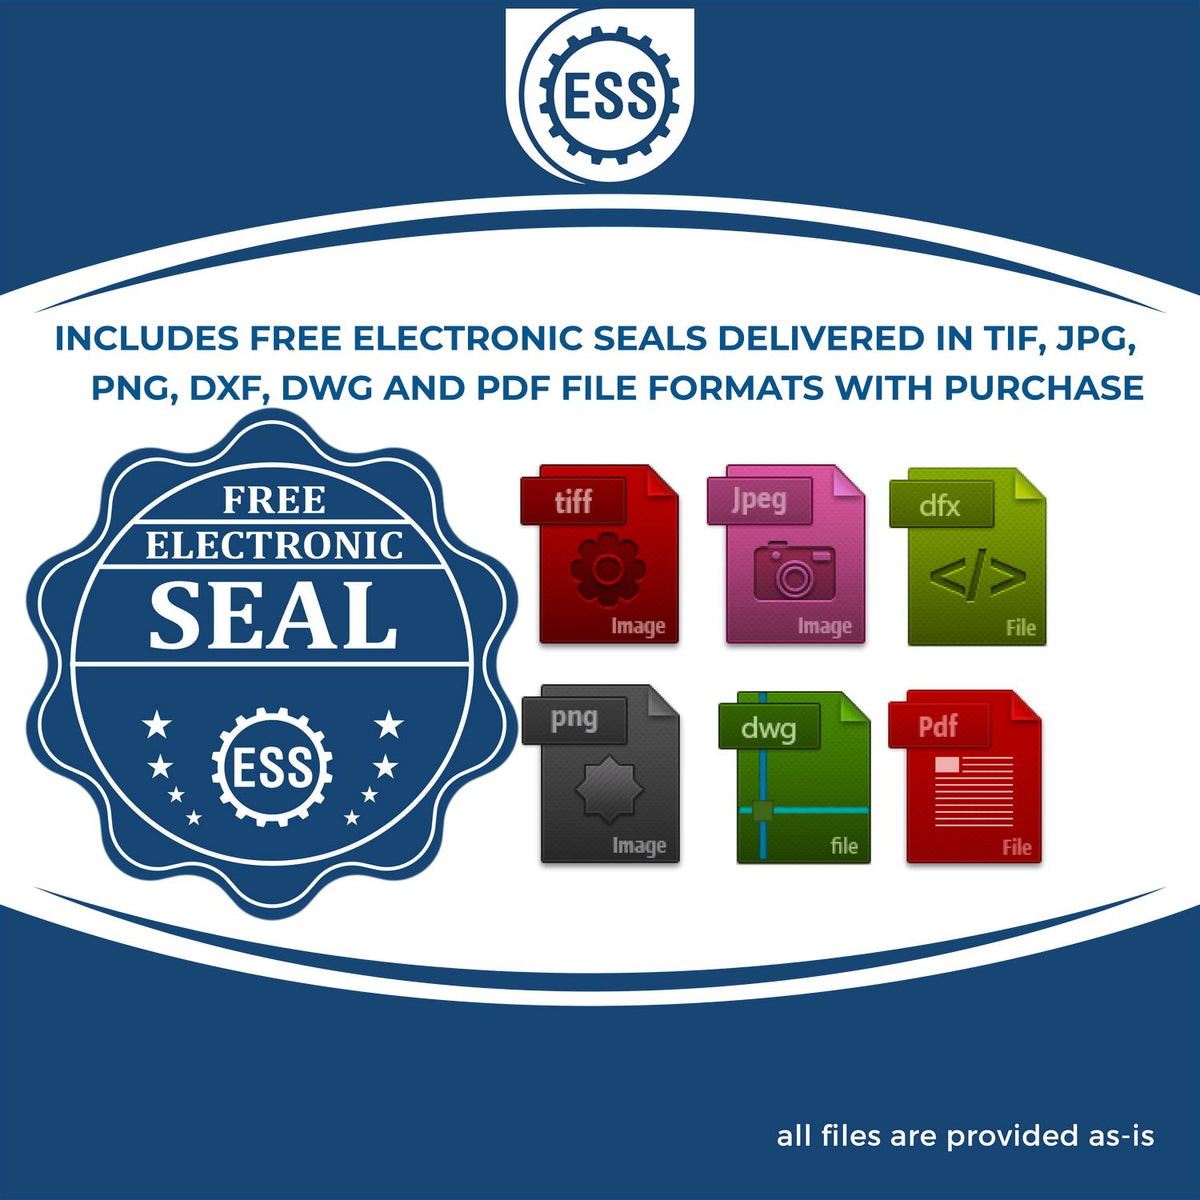 An infographic for the free electronic seal for the Soft New Hampshire Professional Engineer Seal illustrating the different file type icons such as DXF, DWG, TIF, JPG and PNG.